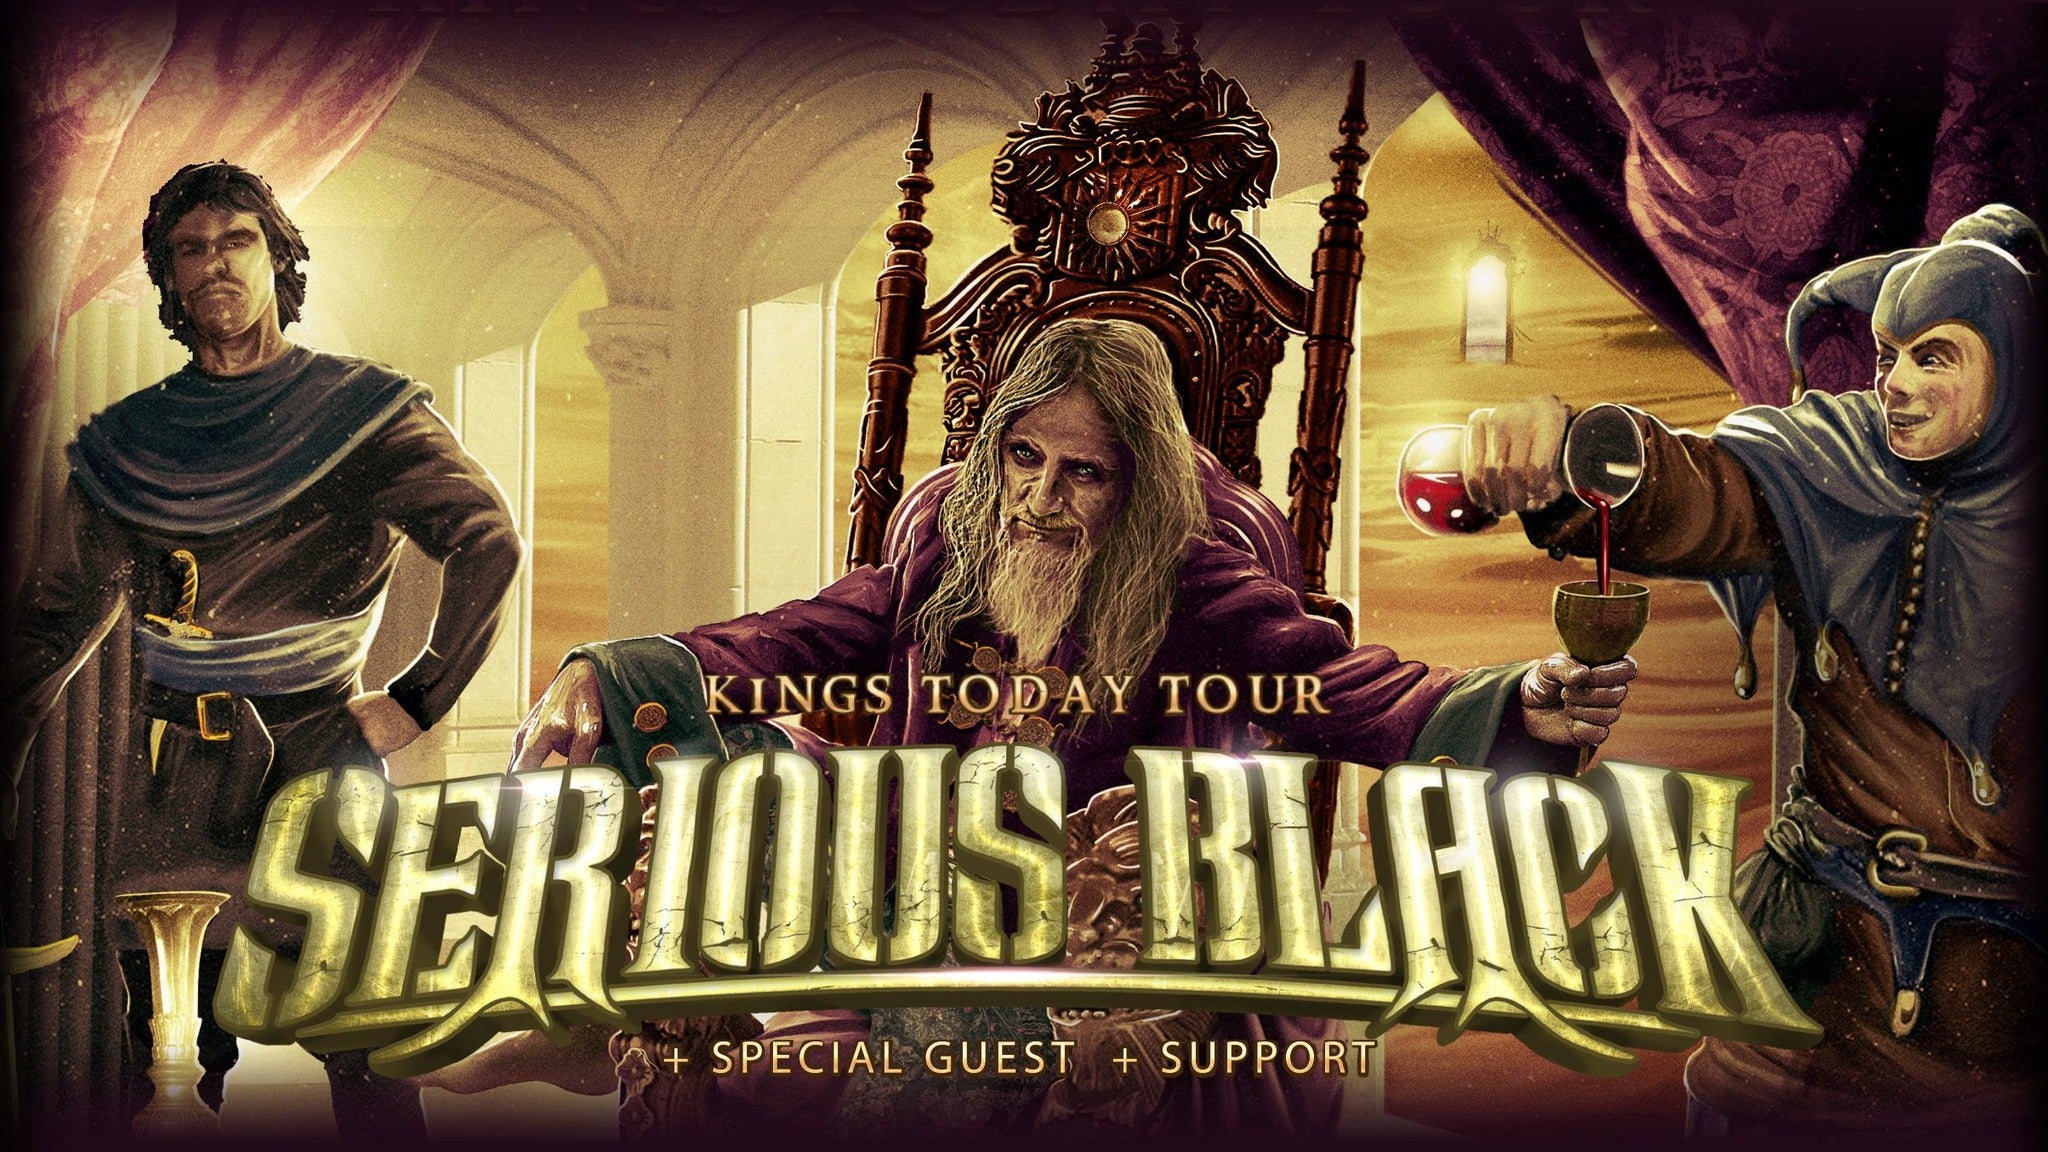 SERIOUS BLACK - Kings Today Tour + special guests